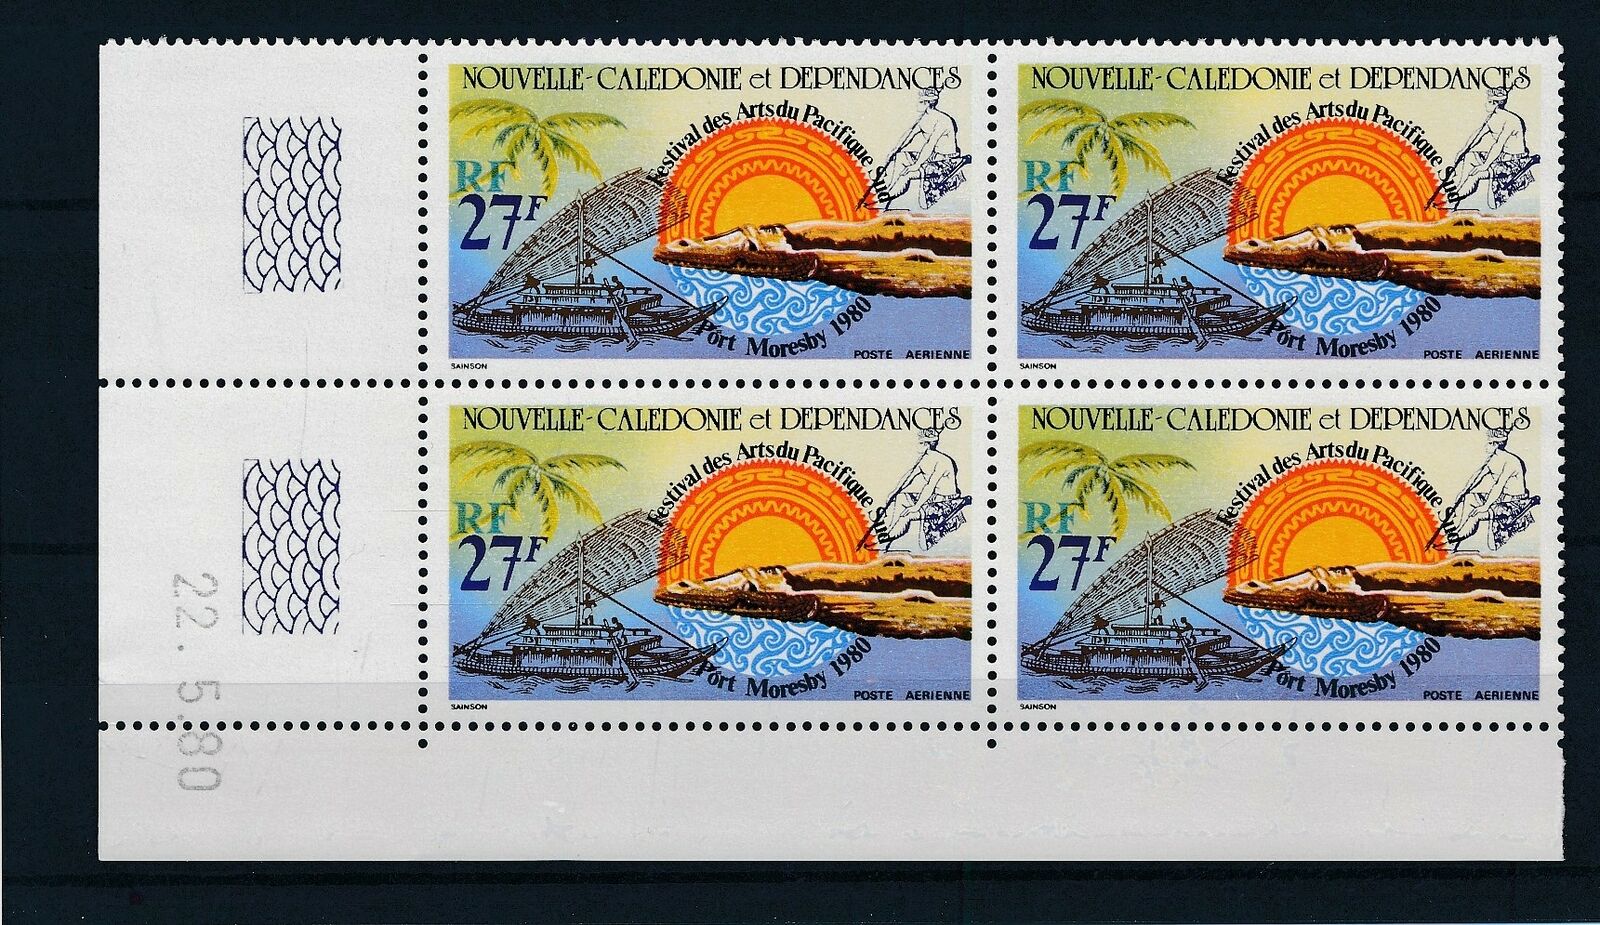 [335898] New Caledonia boat good block of 4 very fine MNH stamp